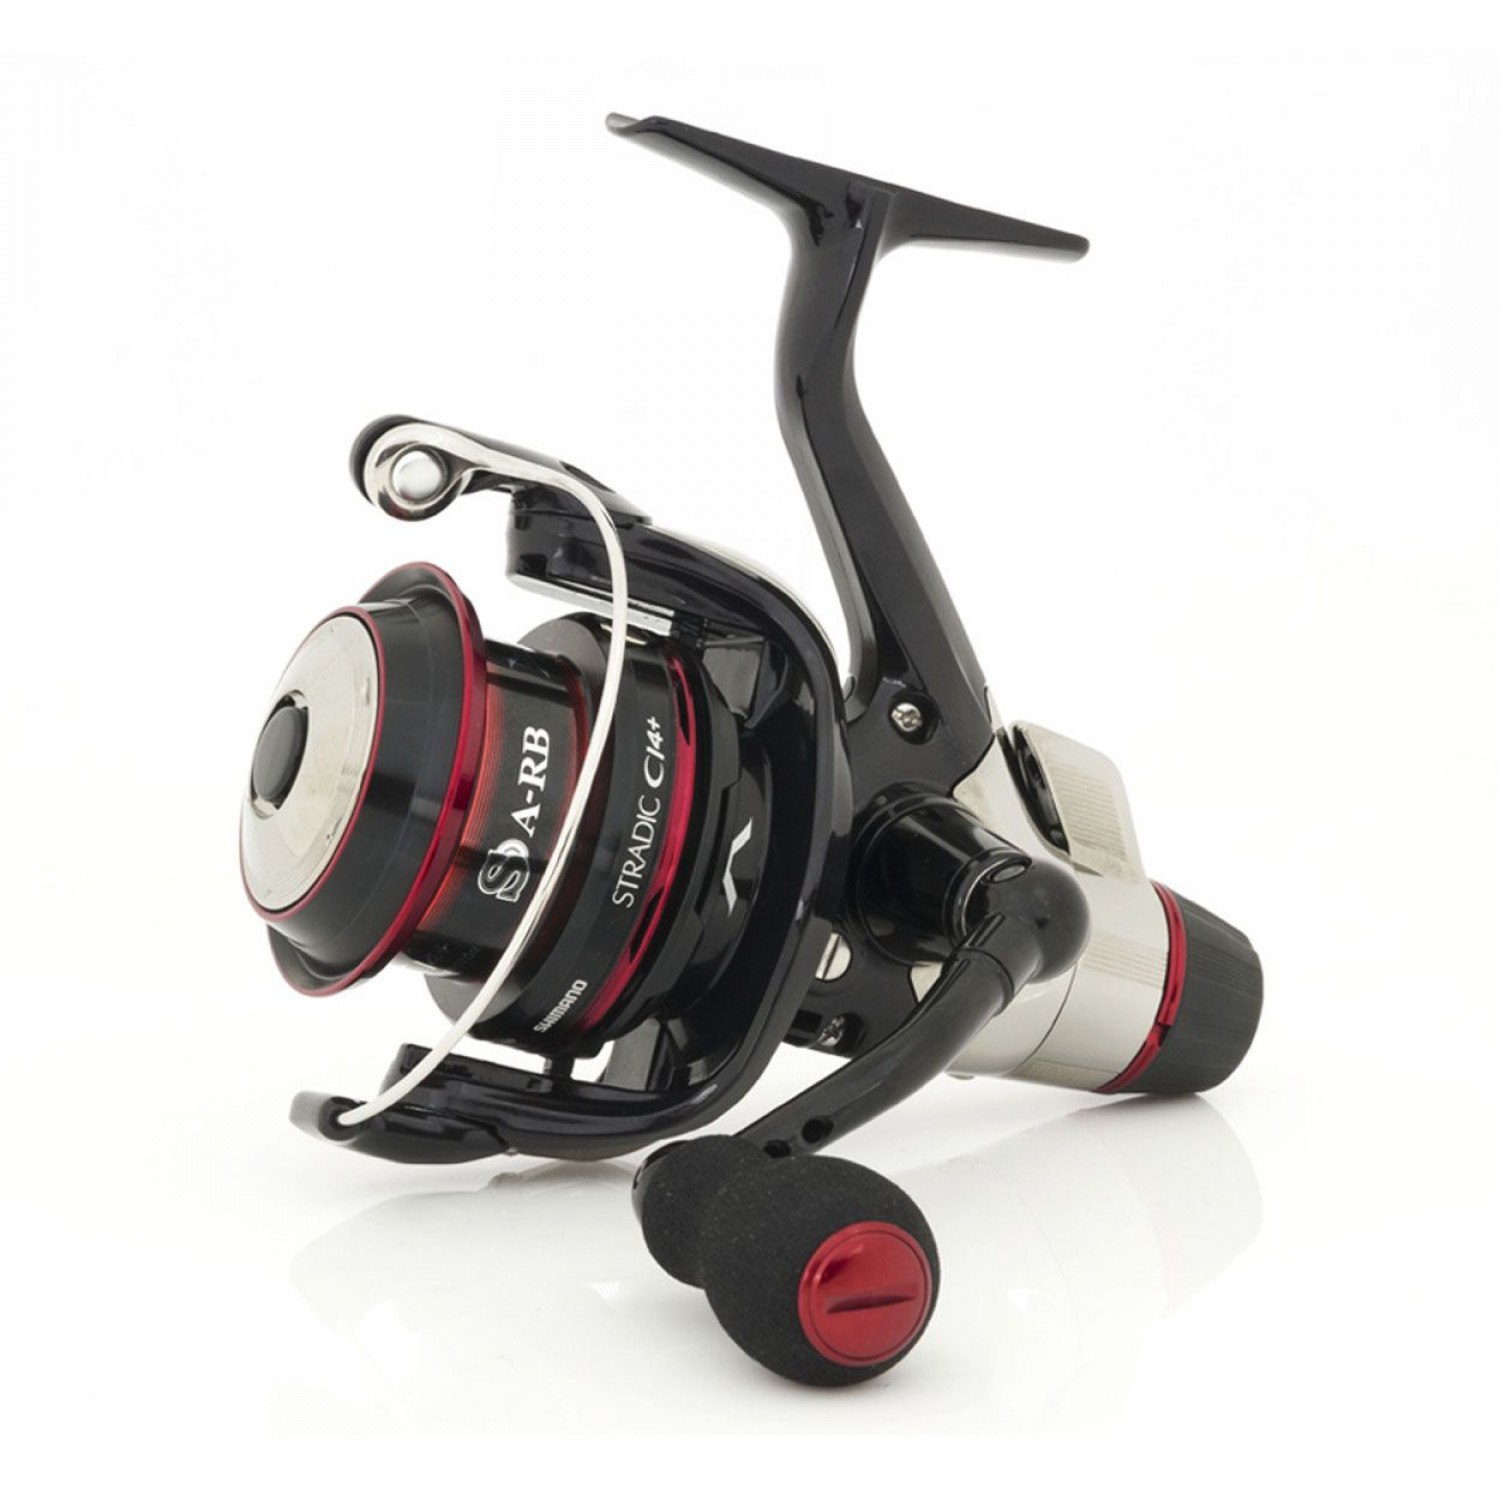 Shimano Stradic Ci4 2500 - Hard To Trip And Noisy When Wet